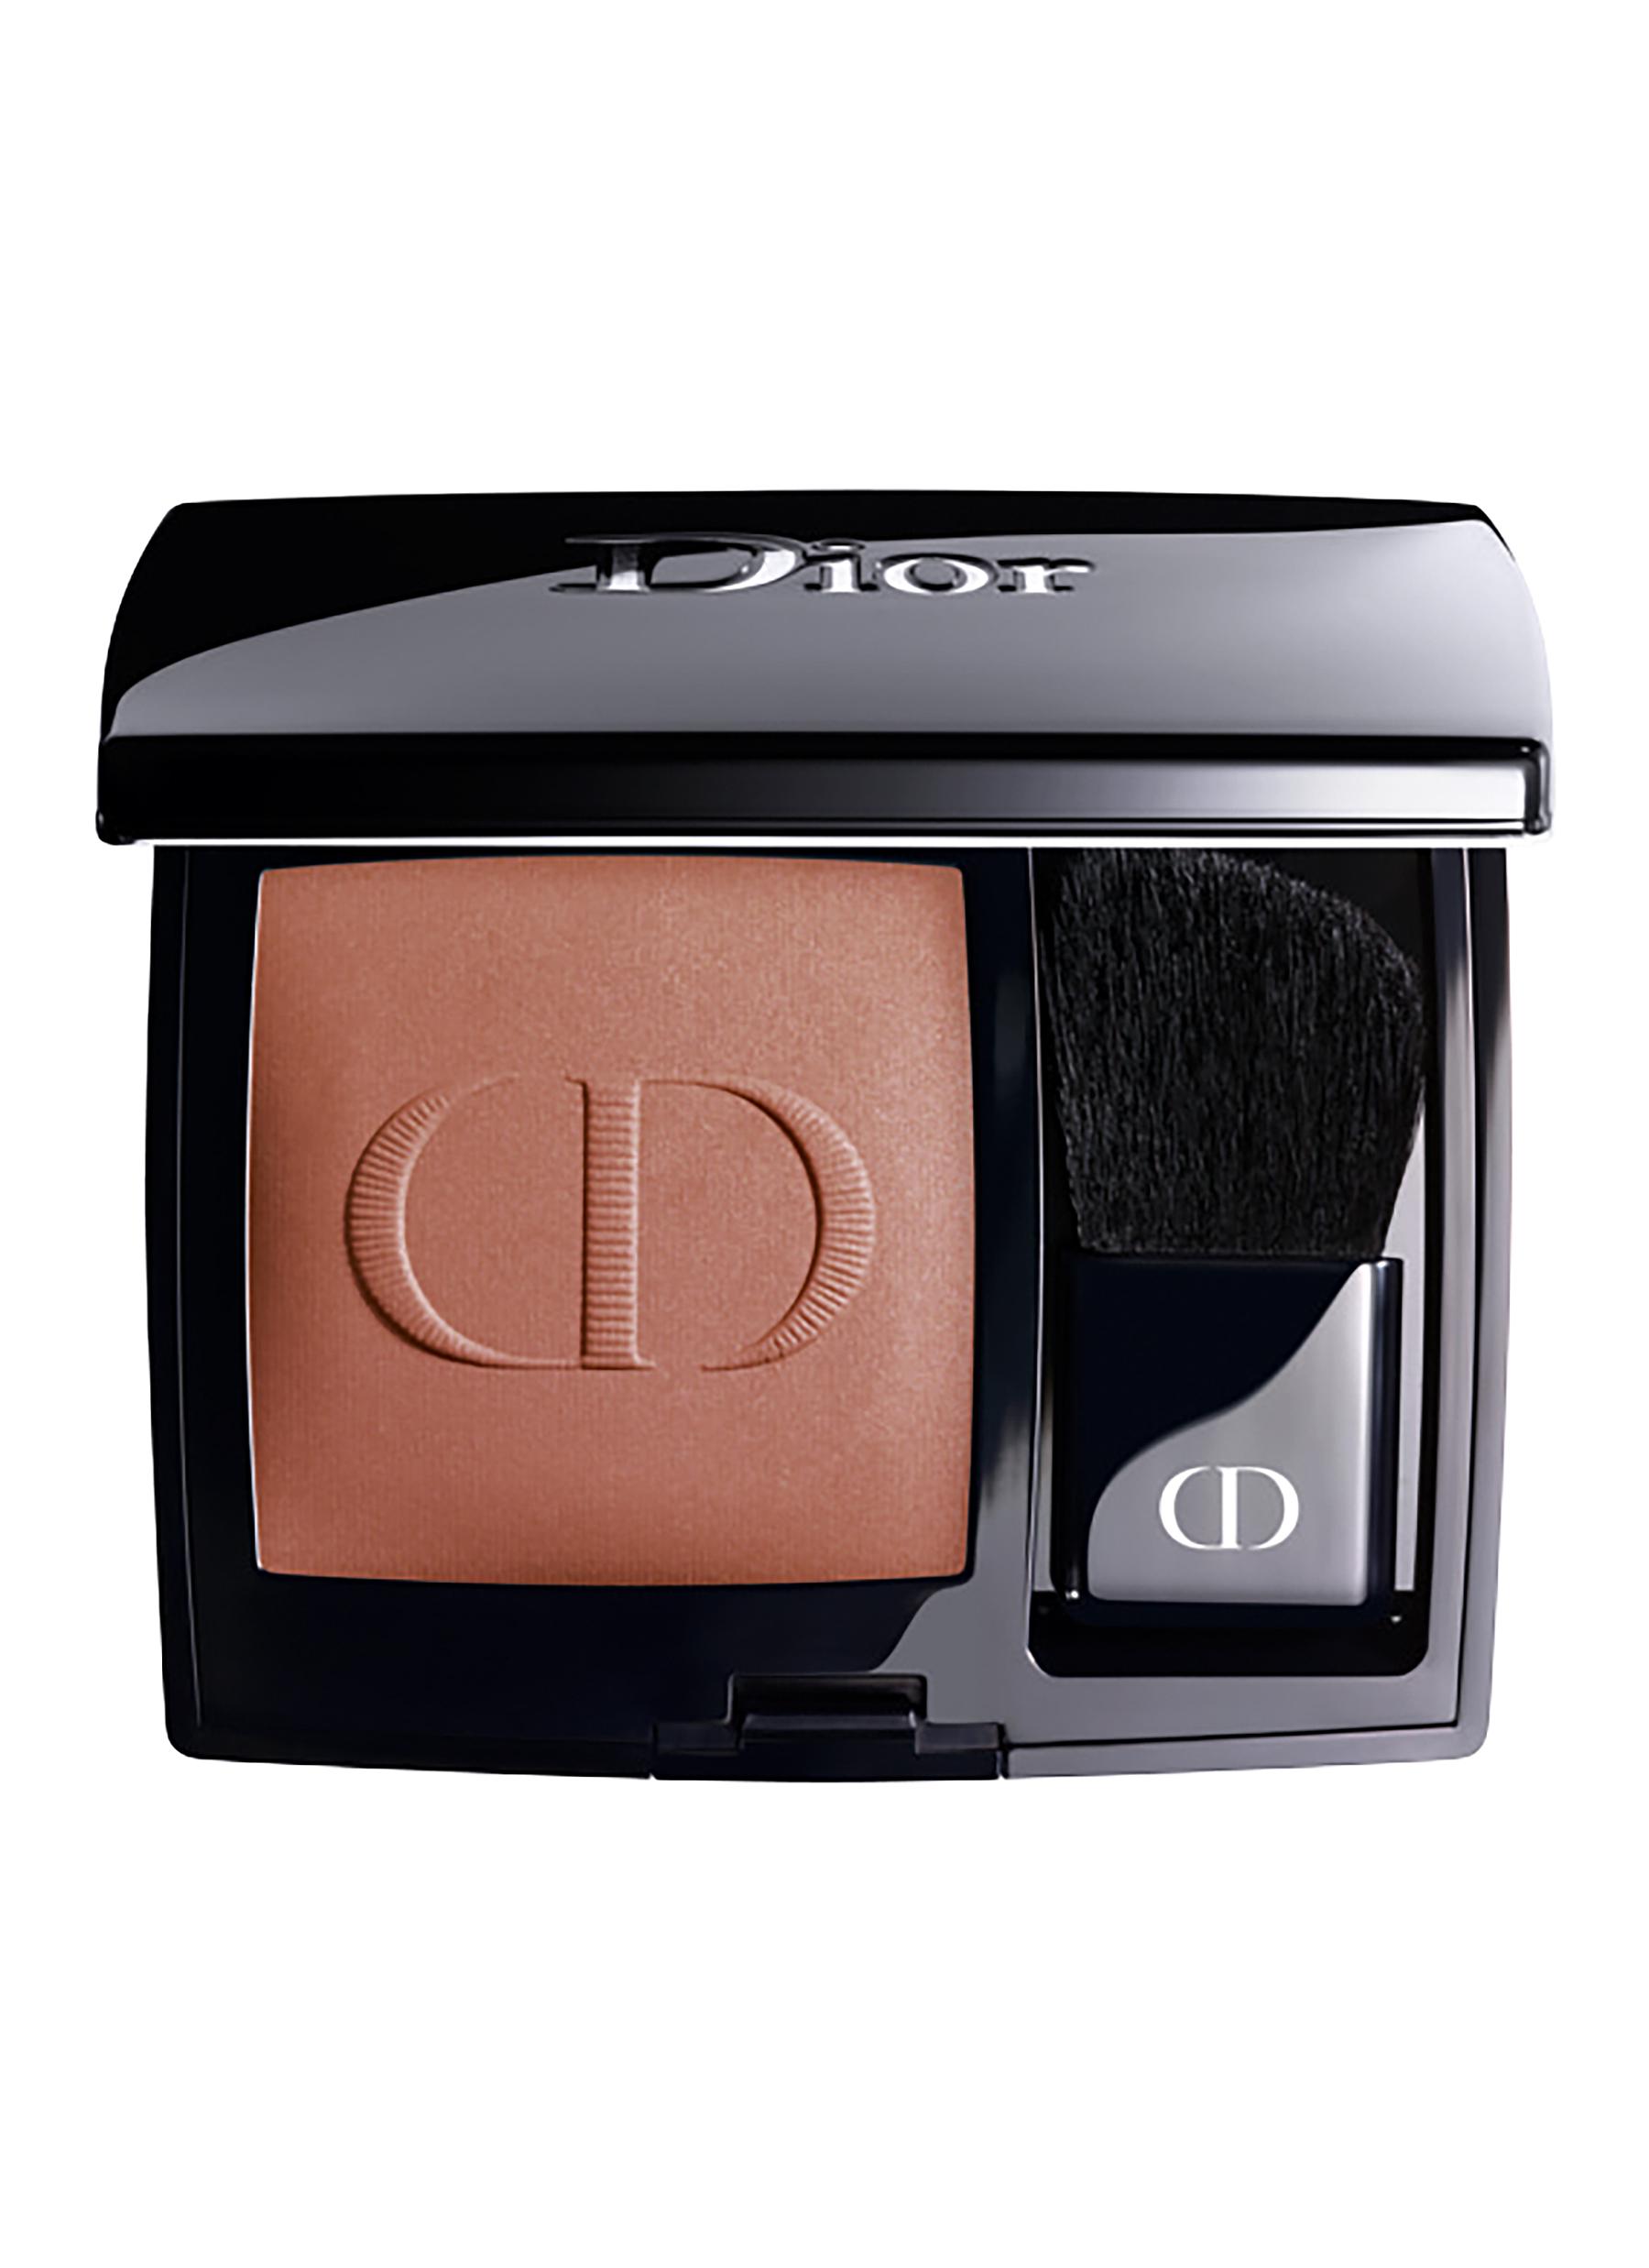 dior rouge blush 459 charnelle